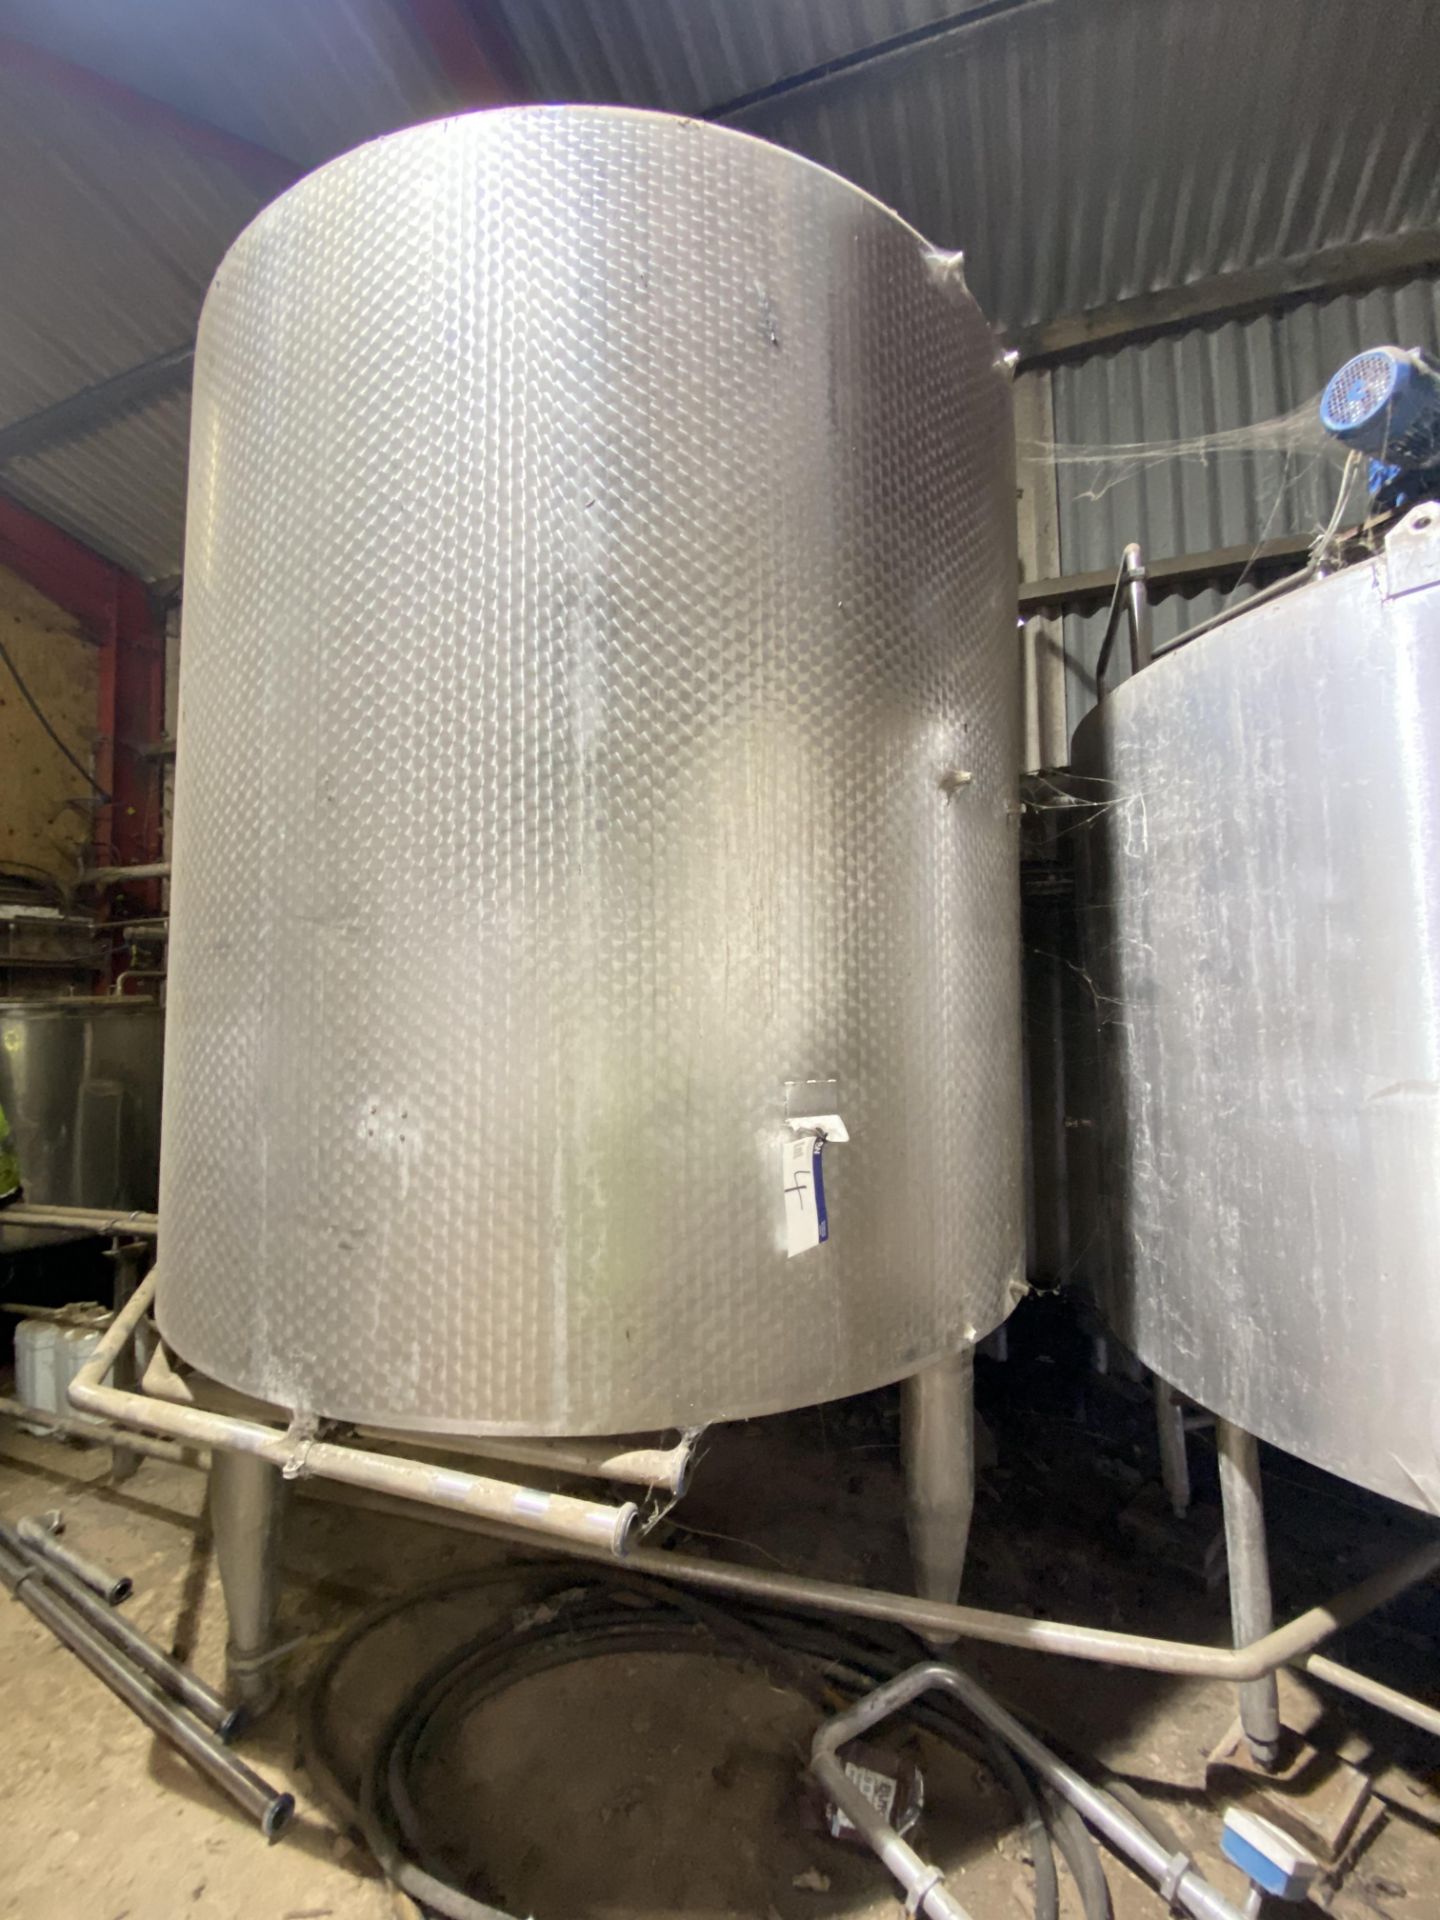 Pasilac SBQ VERTICAL STAINLESS STEEL MIXING VESSEL, code no. 733.16, serial no. 54.754/01.2, approx.